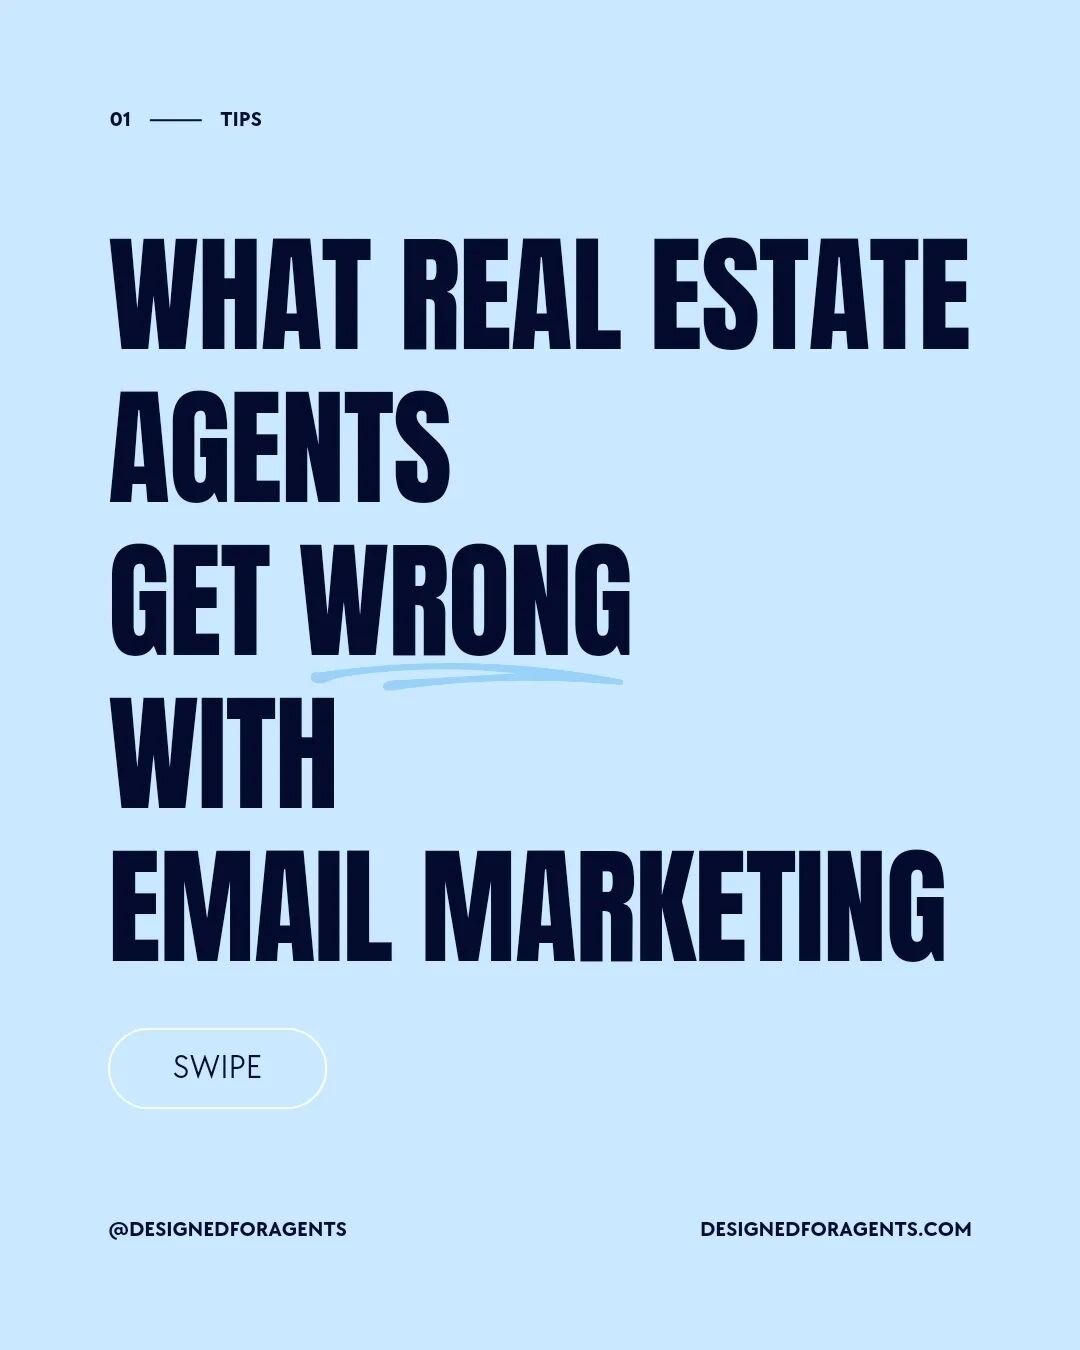 If you started tackling email marketing in 2023 that means you have a year's worth of data to review and guide your strategy for 2024! Stay tuned, we'll be sharing a winning email marketing strategy for real estate agents that you can easily implemen